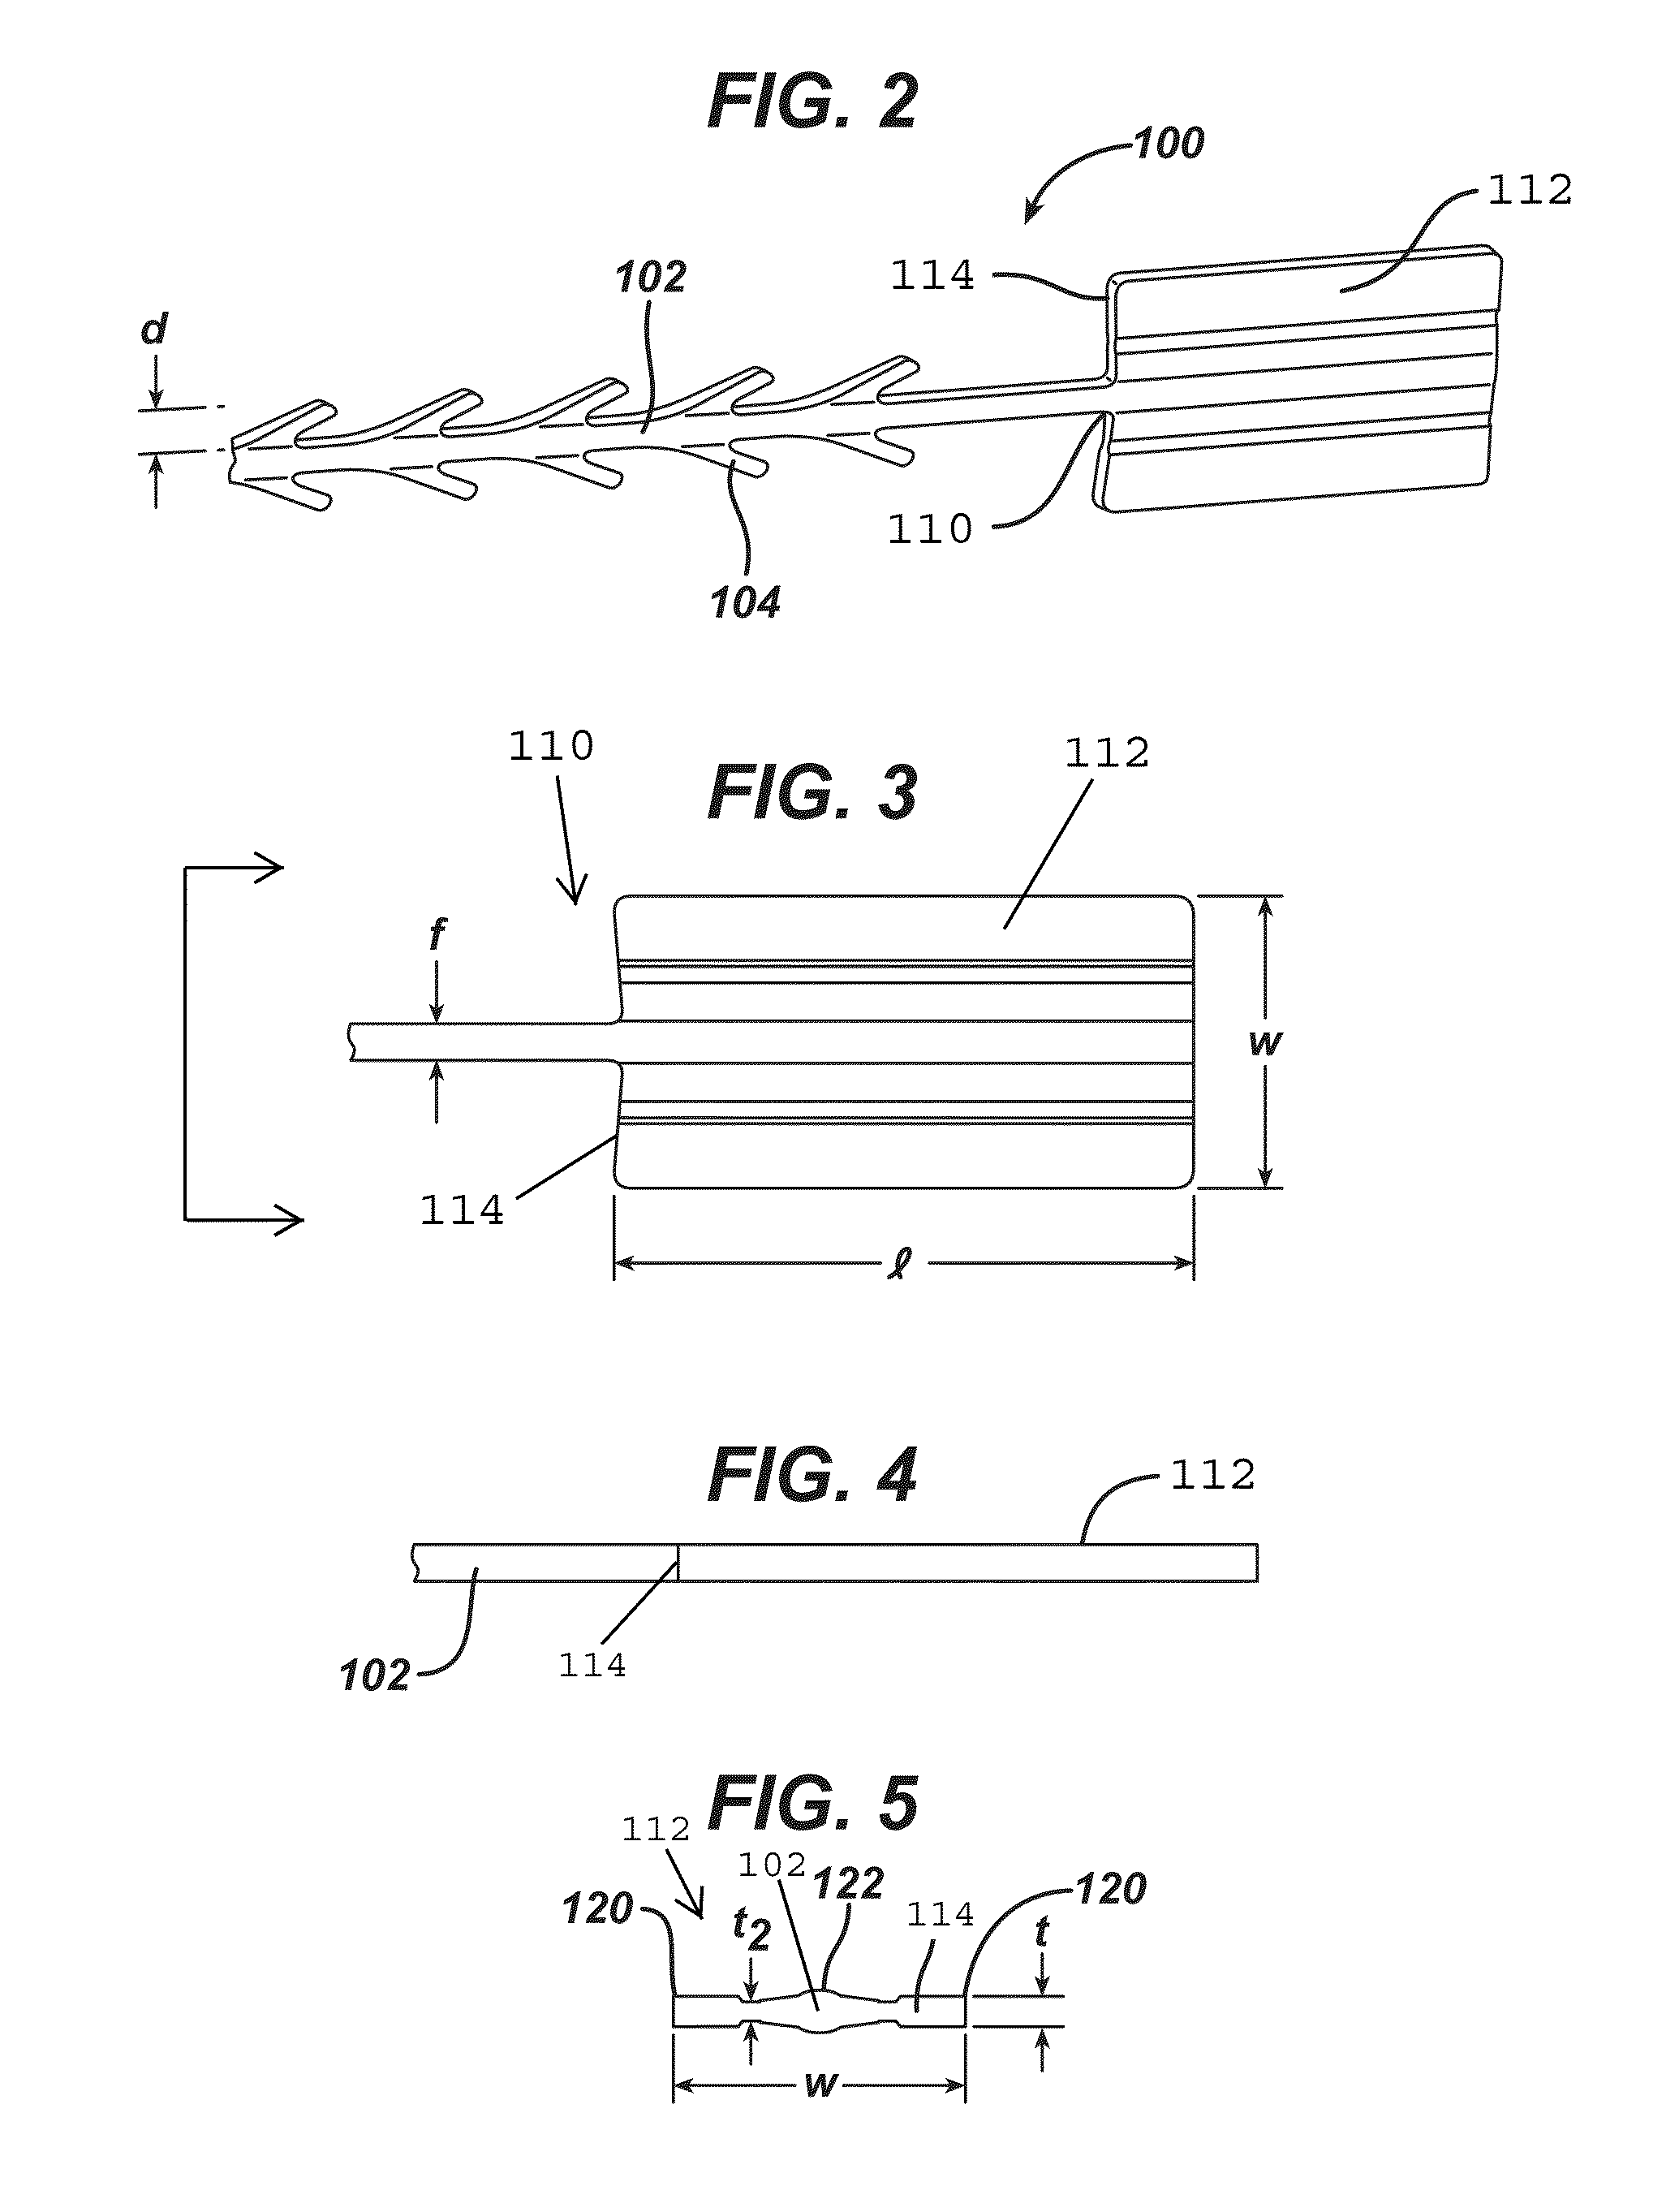 Barbed sutures having contoured barbs that facilitate passage through tissue and increase holding strength